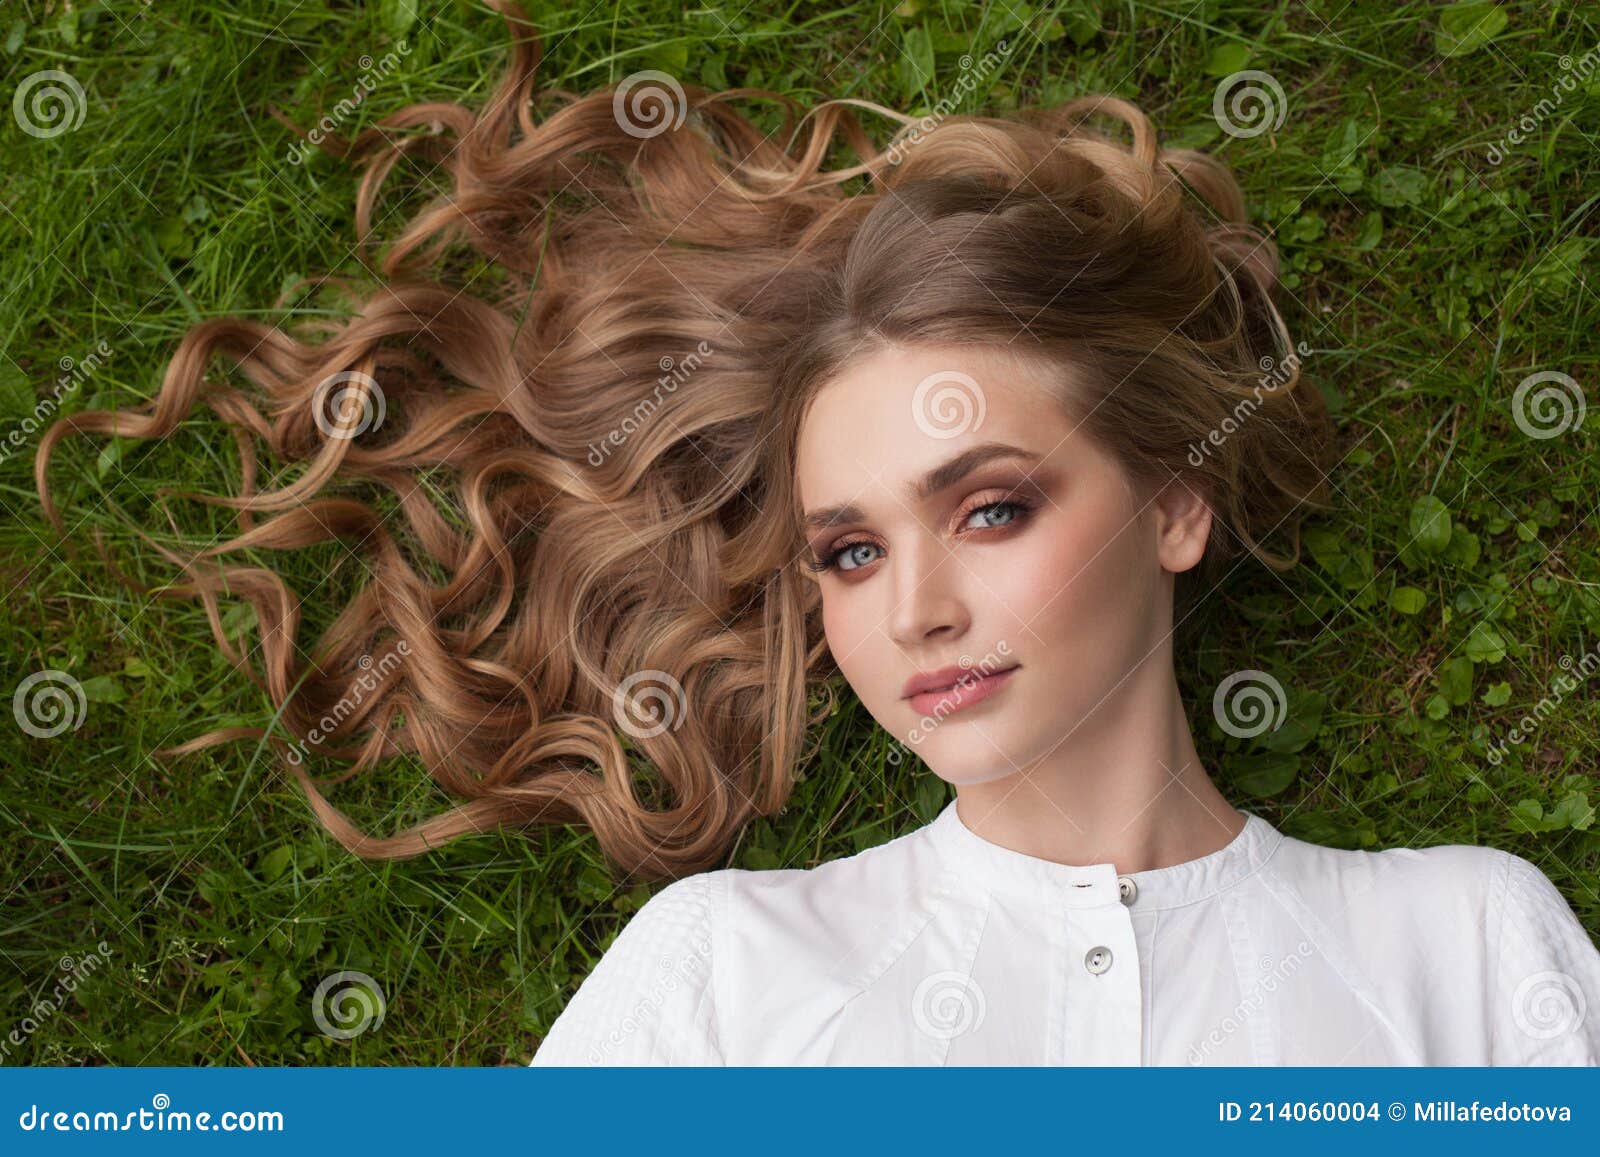 Glamorous Blonde Woman with Perfect Hair - wide 9